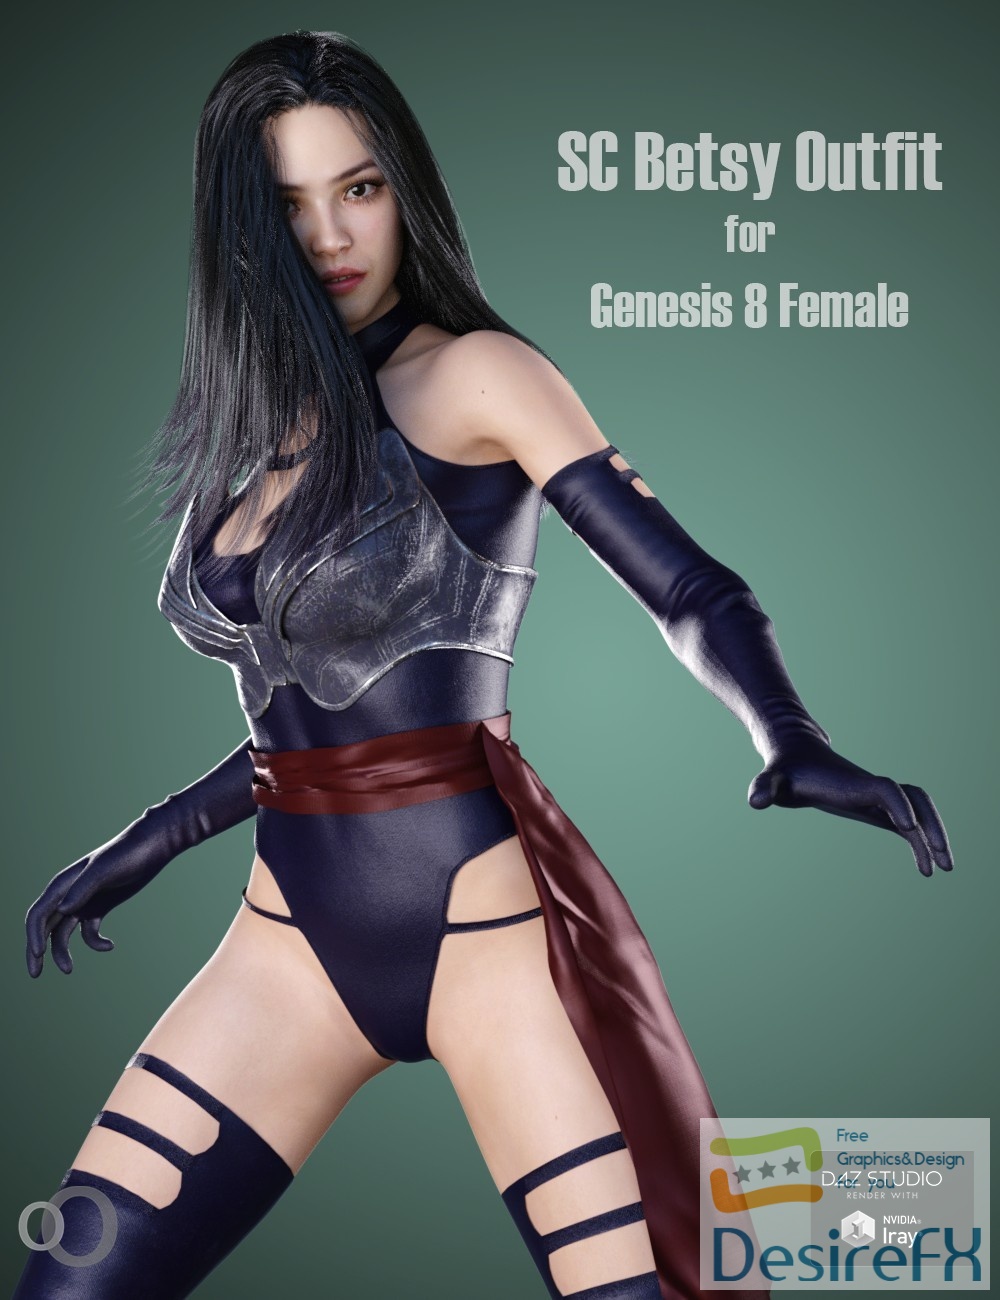 SC Betsy Outfit for Genesis 8 Female